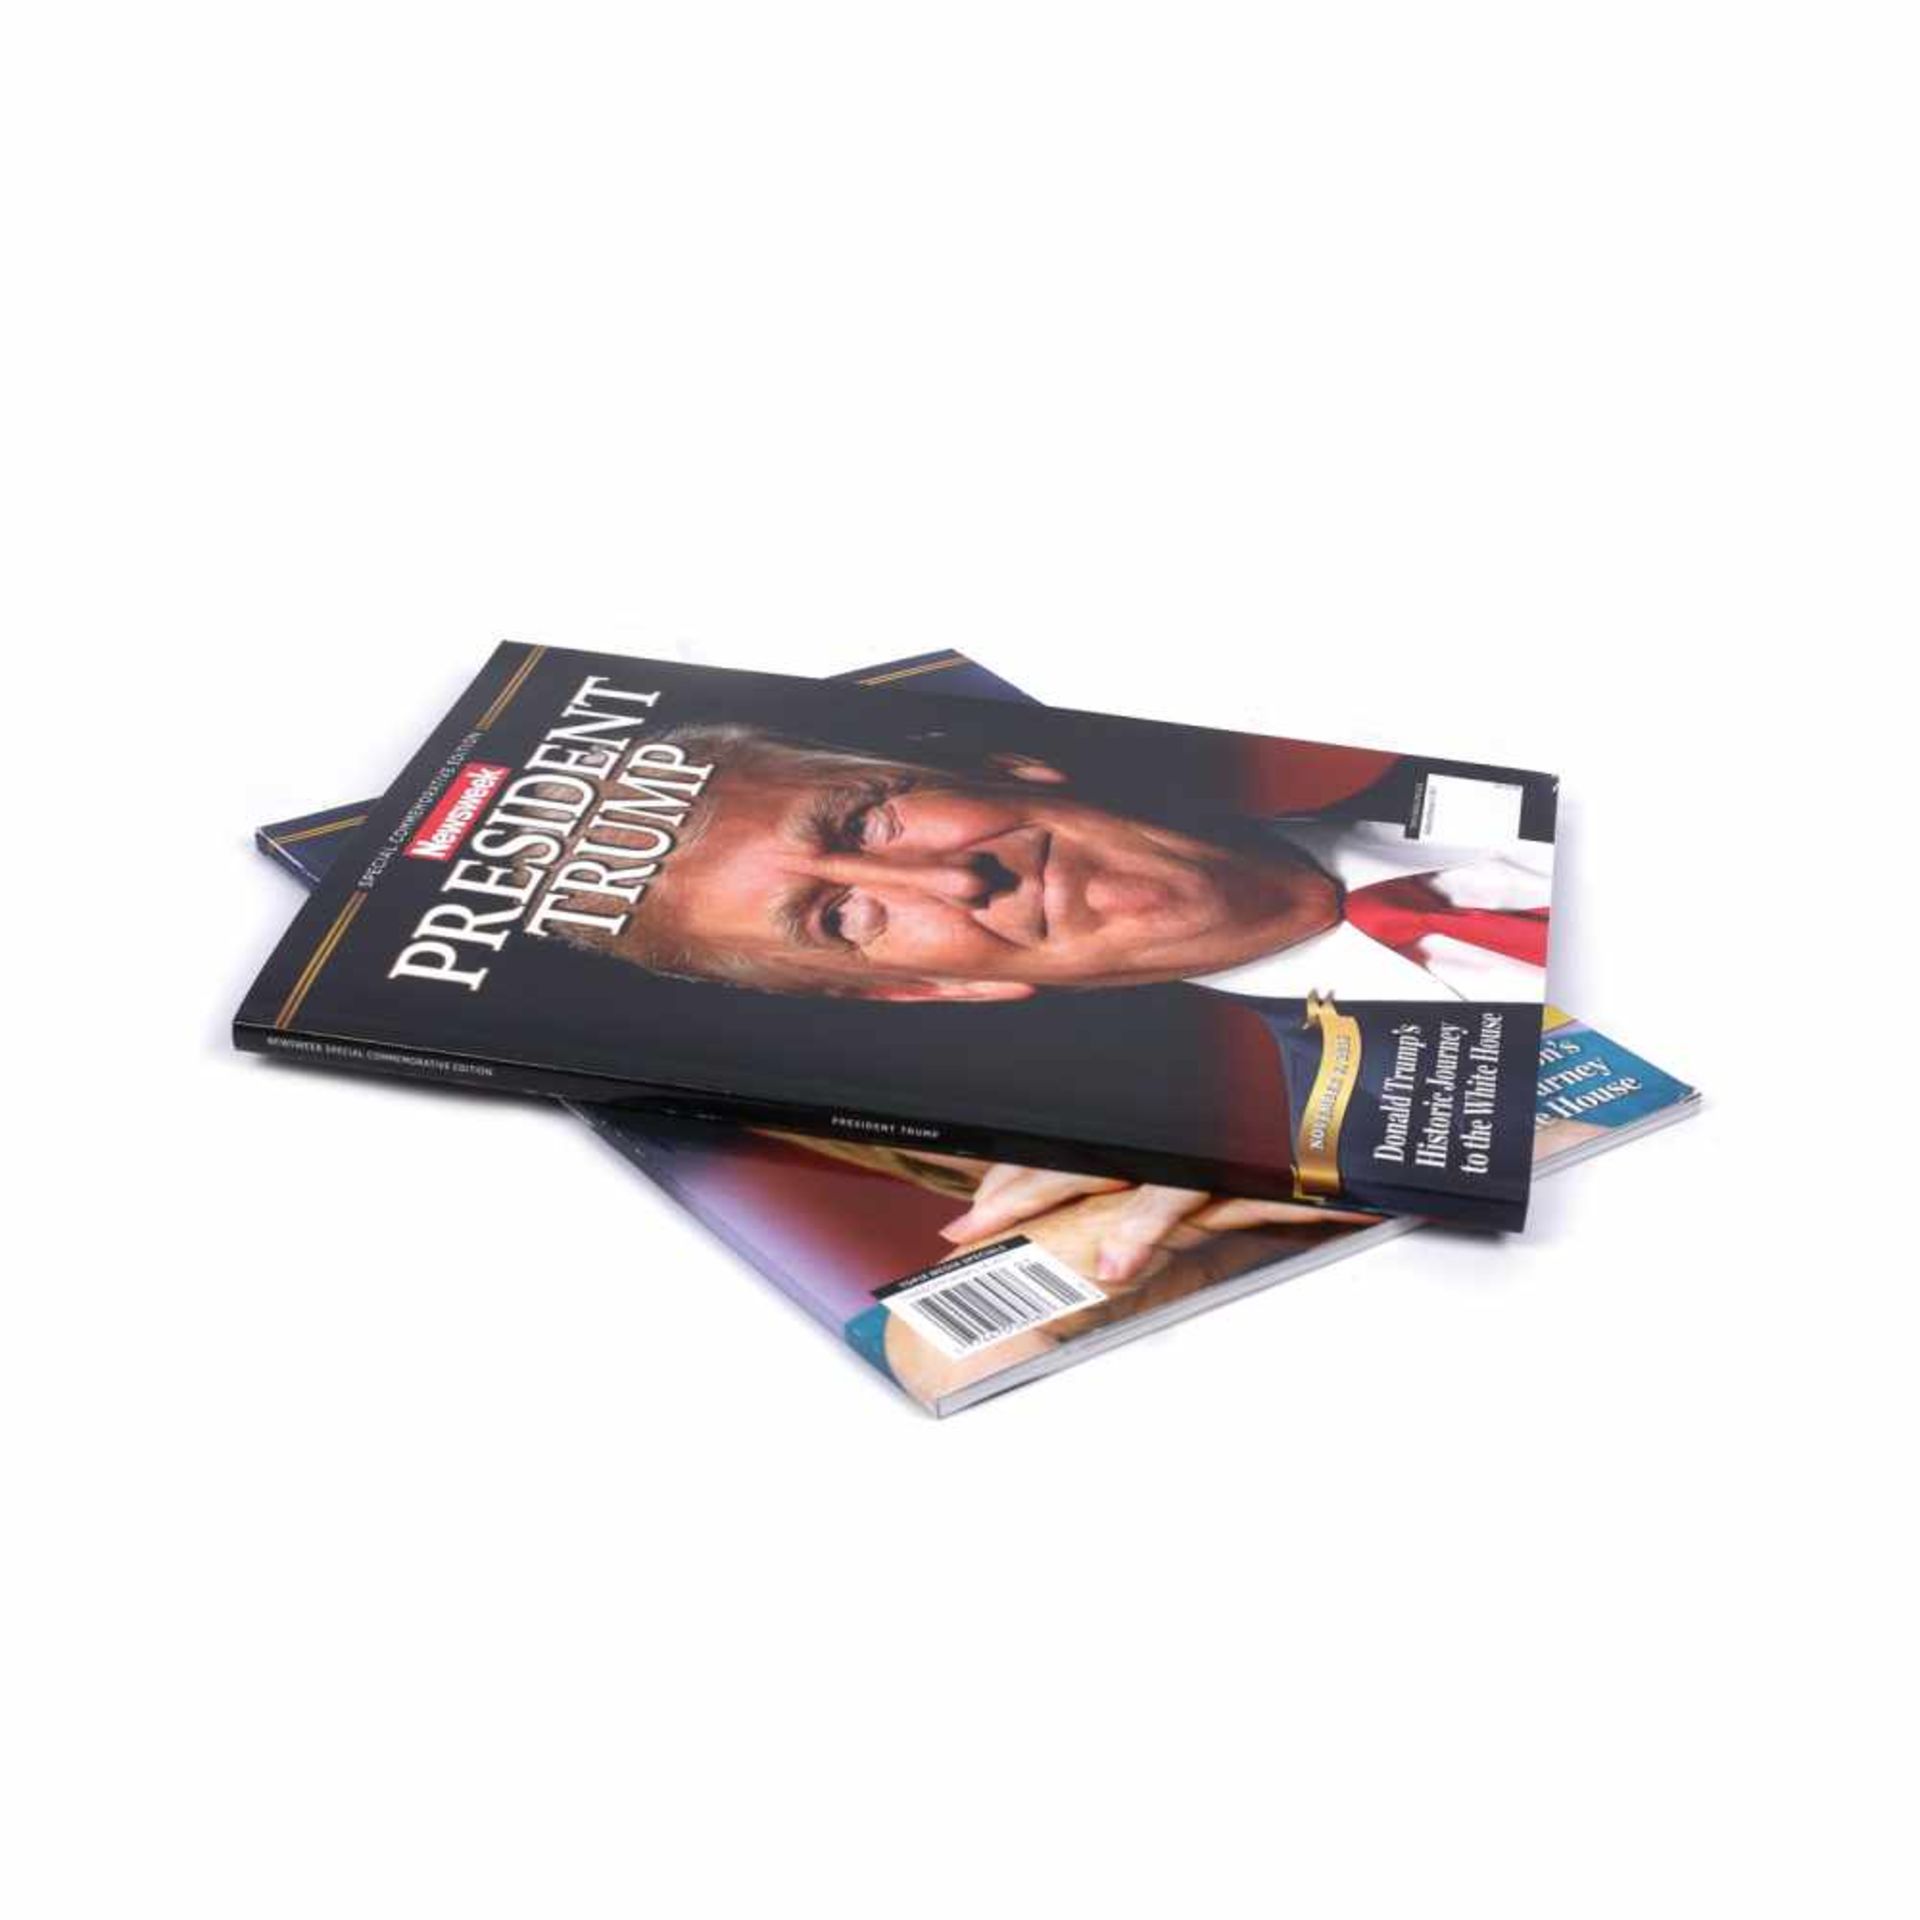 Newsweek Issues of November 2016, both made to celebrate the new president of S.U.A - the one with